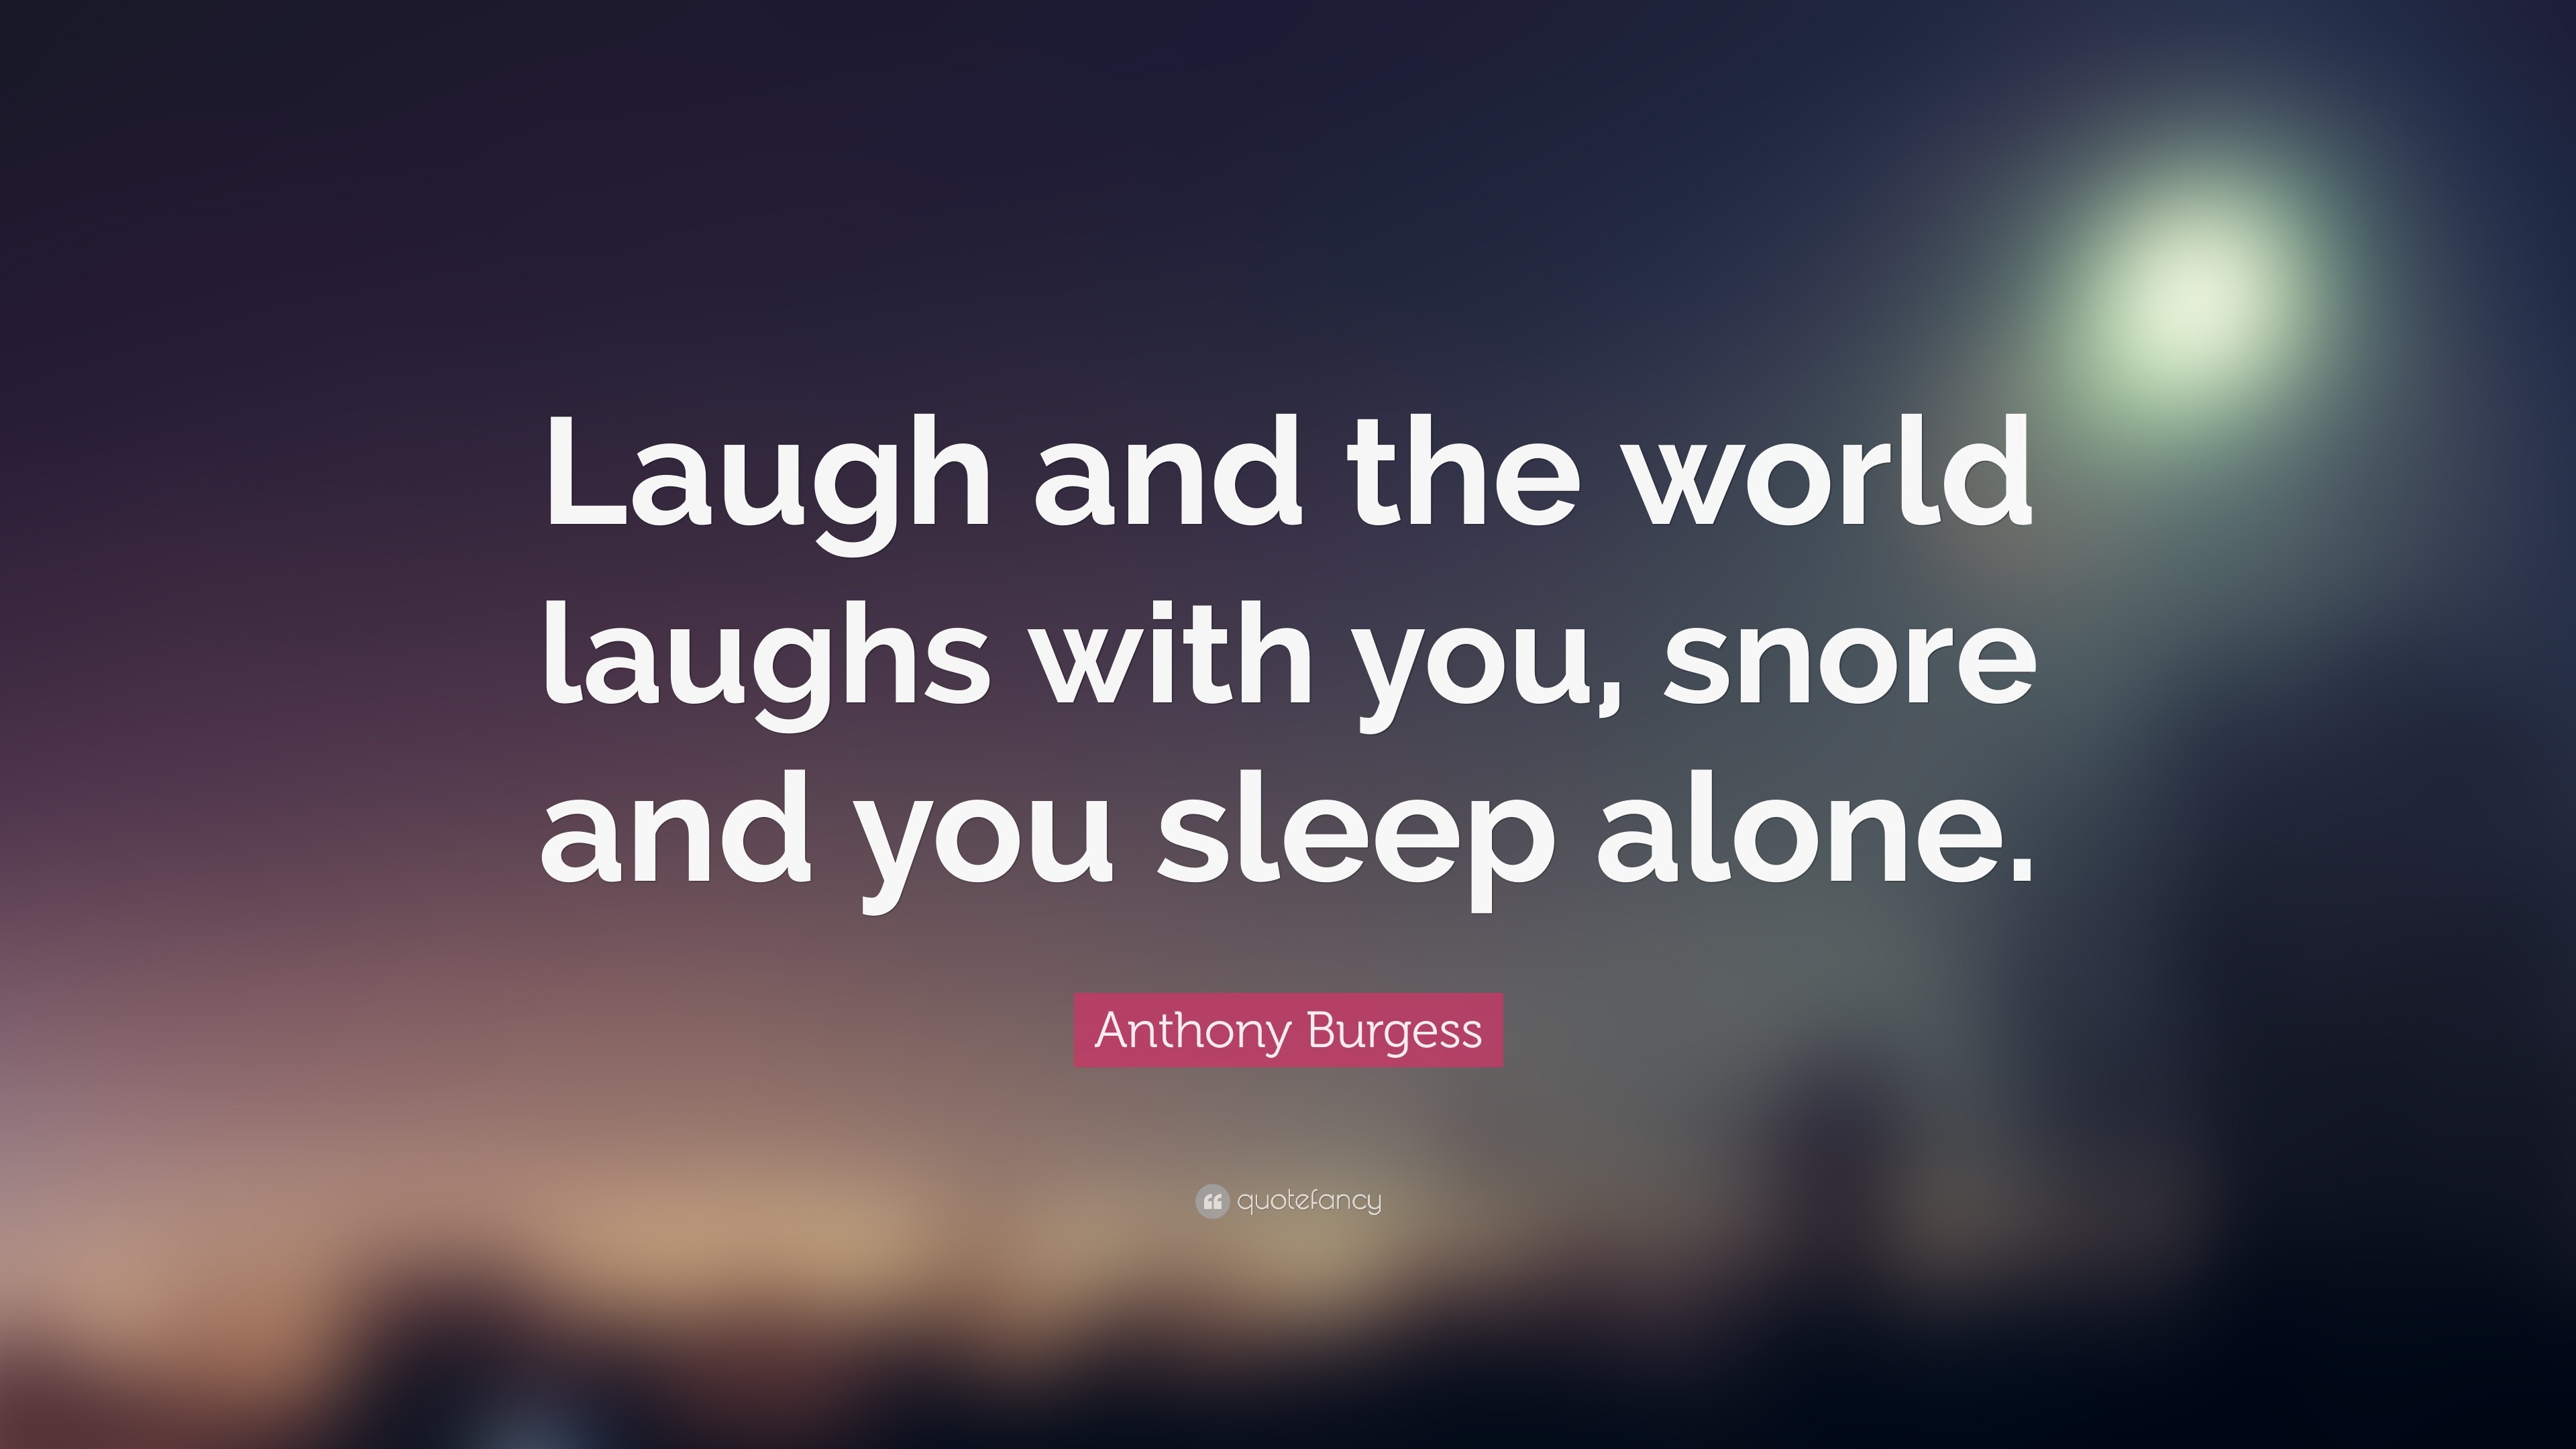 36741-Anthony-Burgess-Quote-Laugh-and-the-world-laughs-with-you-snore.jpg